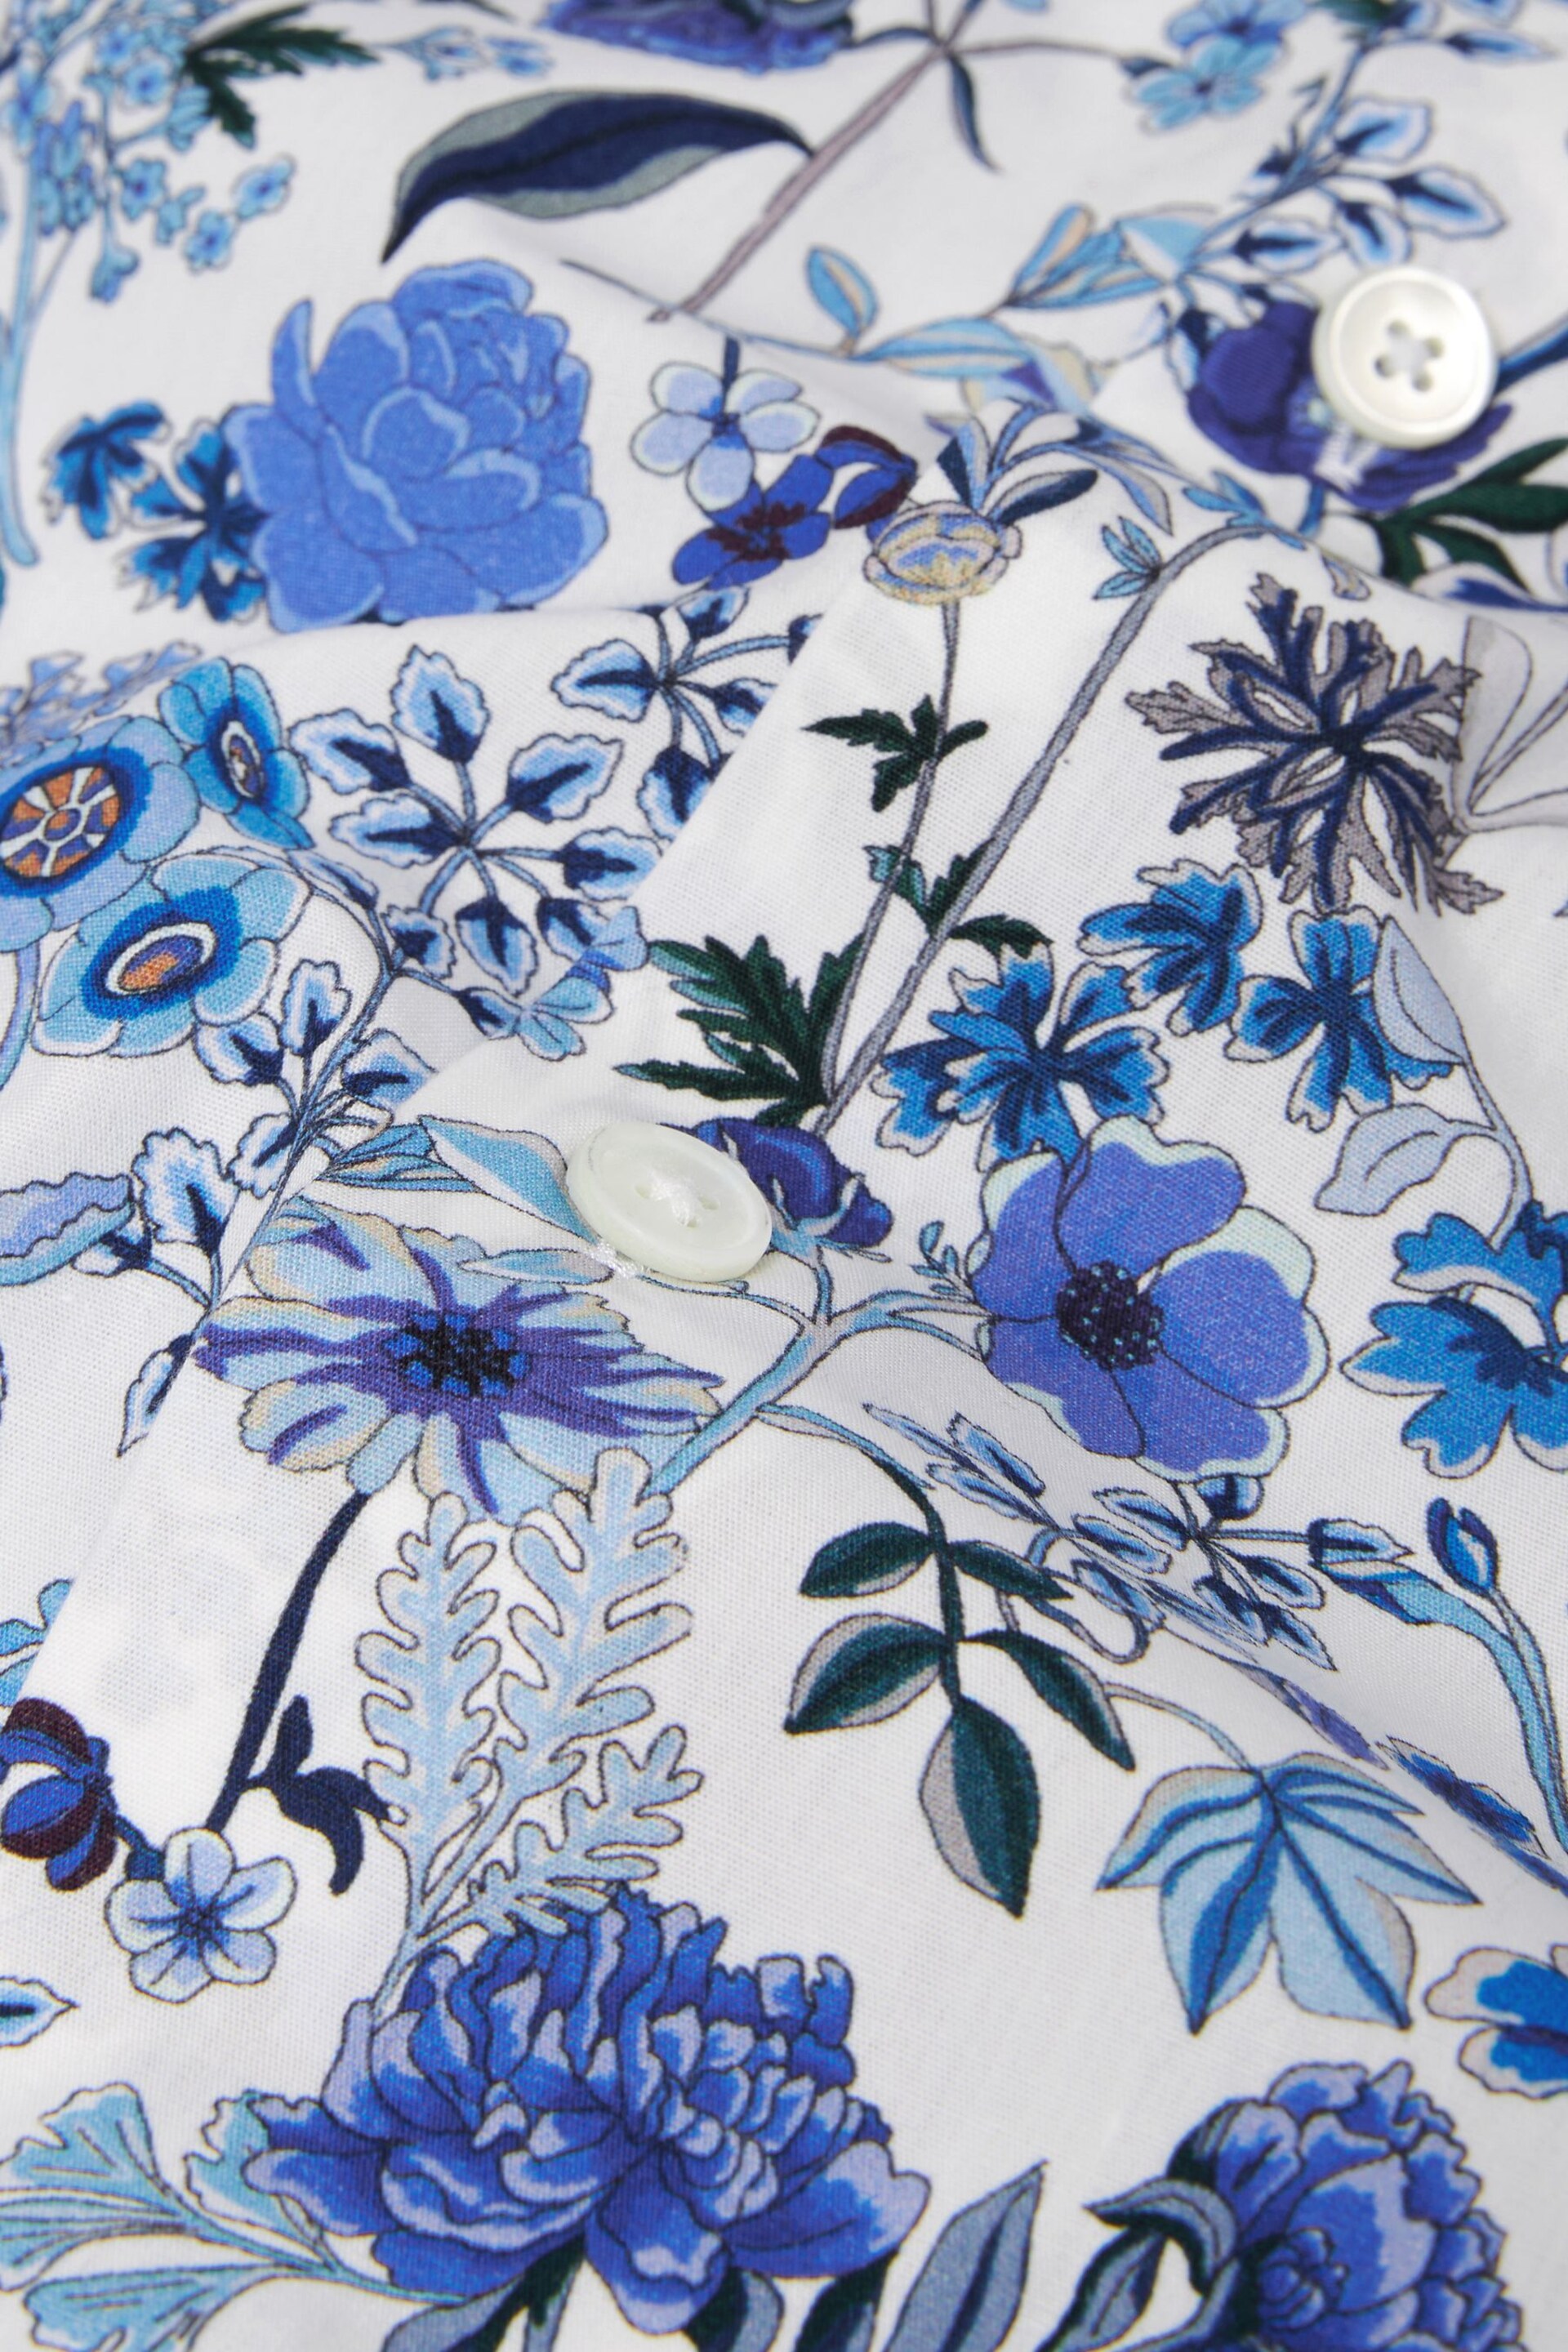 White/Blue Floral Signature Made With Italian Fabric Printed Short Sleeve Shirt - Image 7 of 7